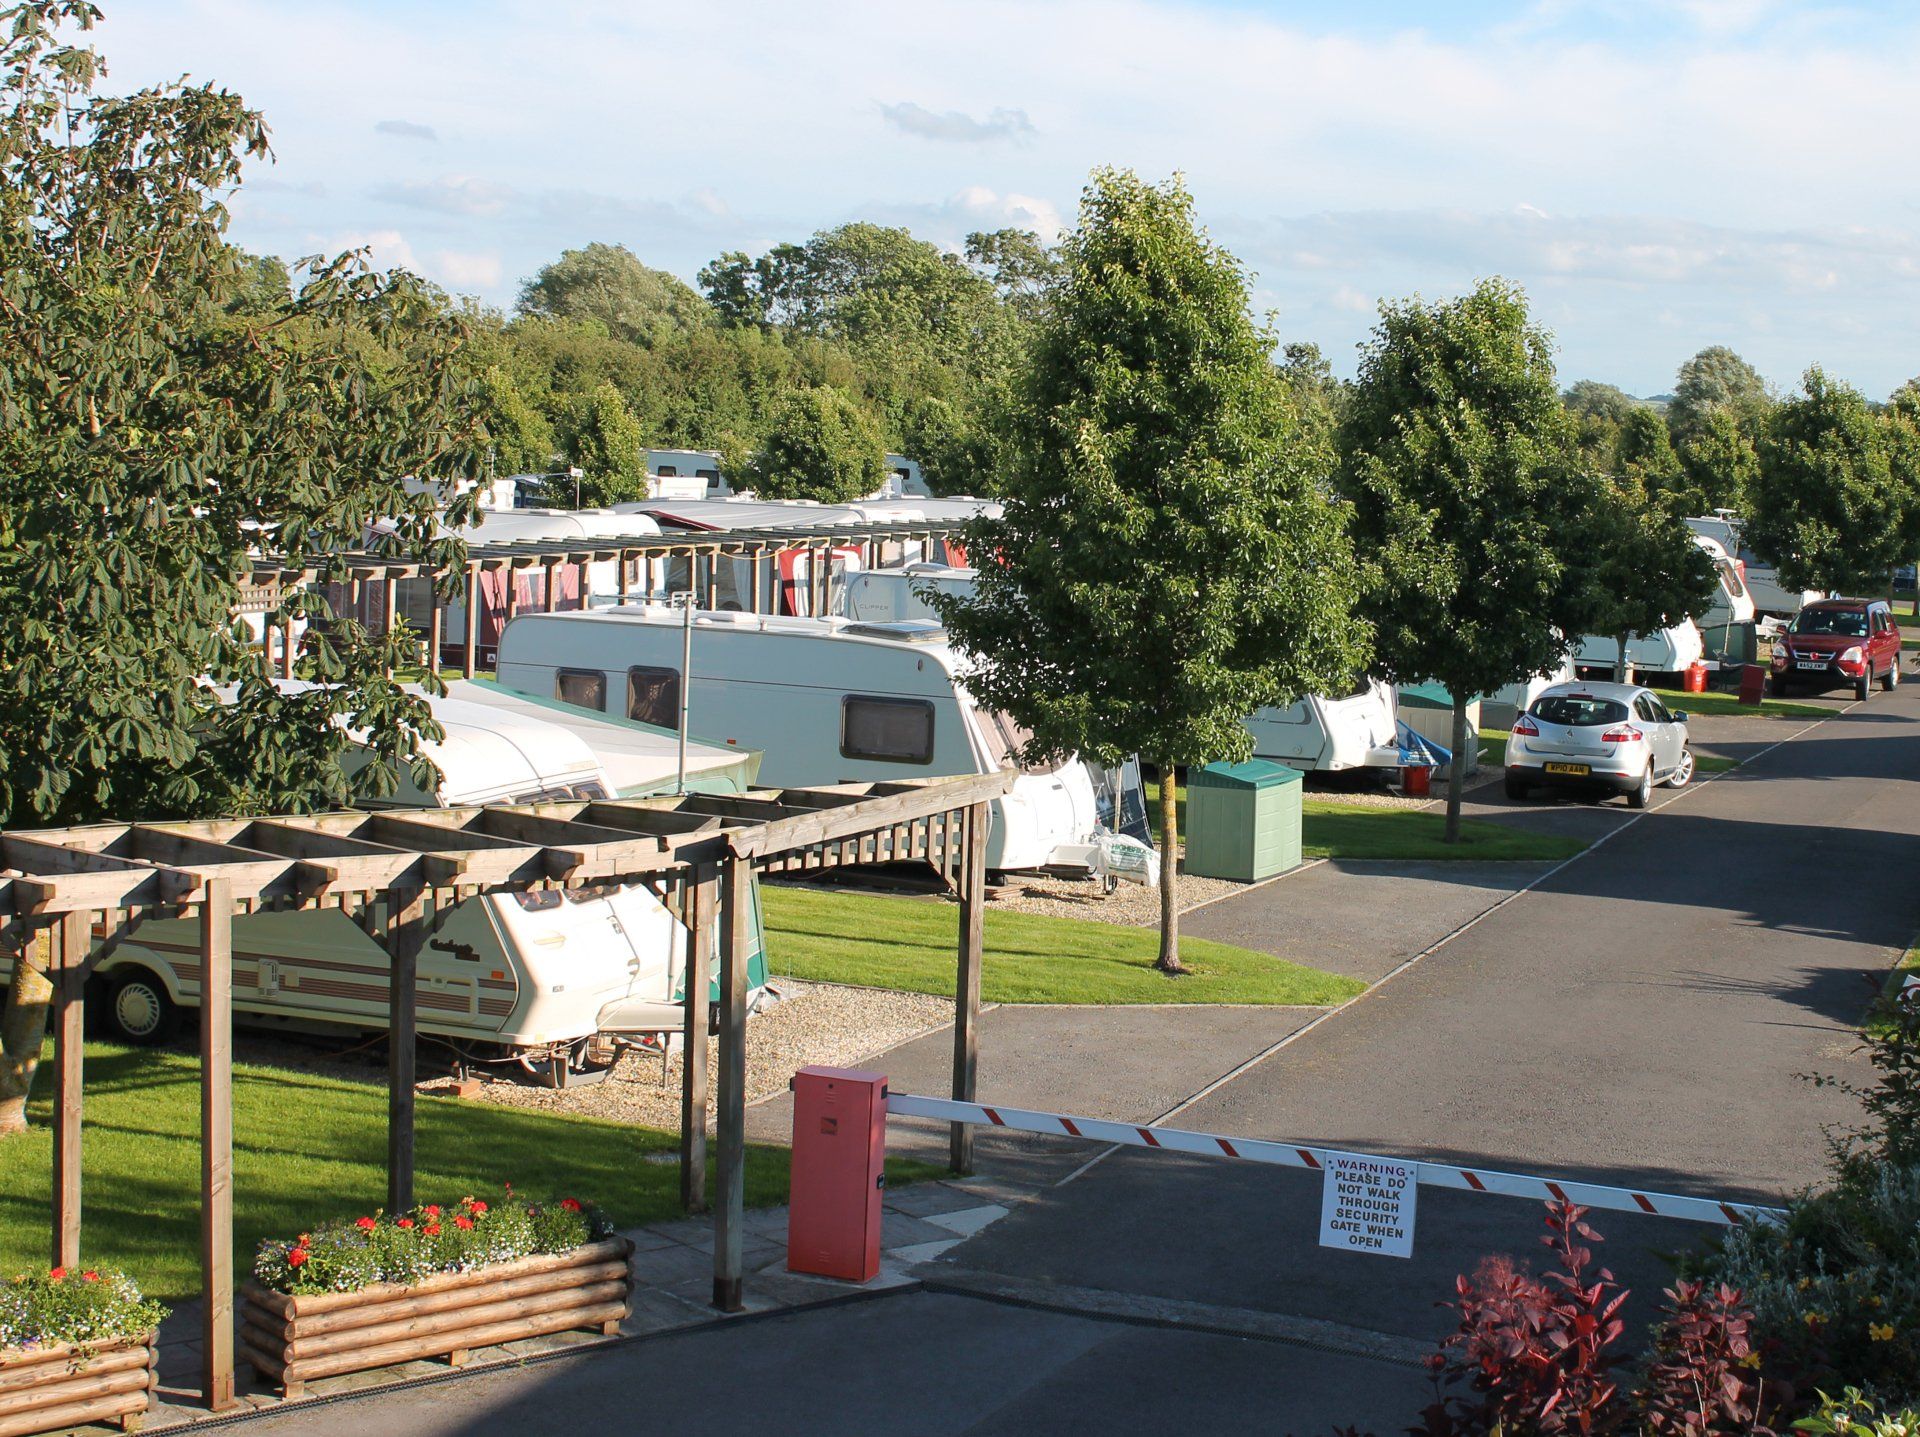 Welcoming Entrance & Caravans Parked in Seasonal Touring Pitches